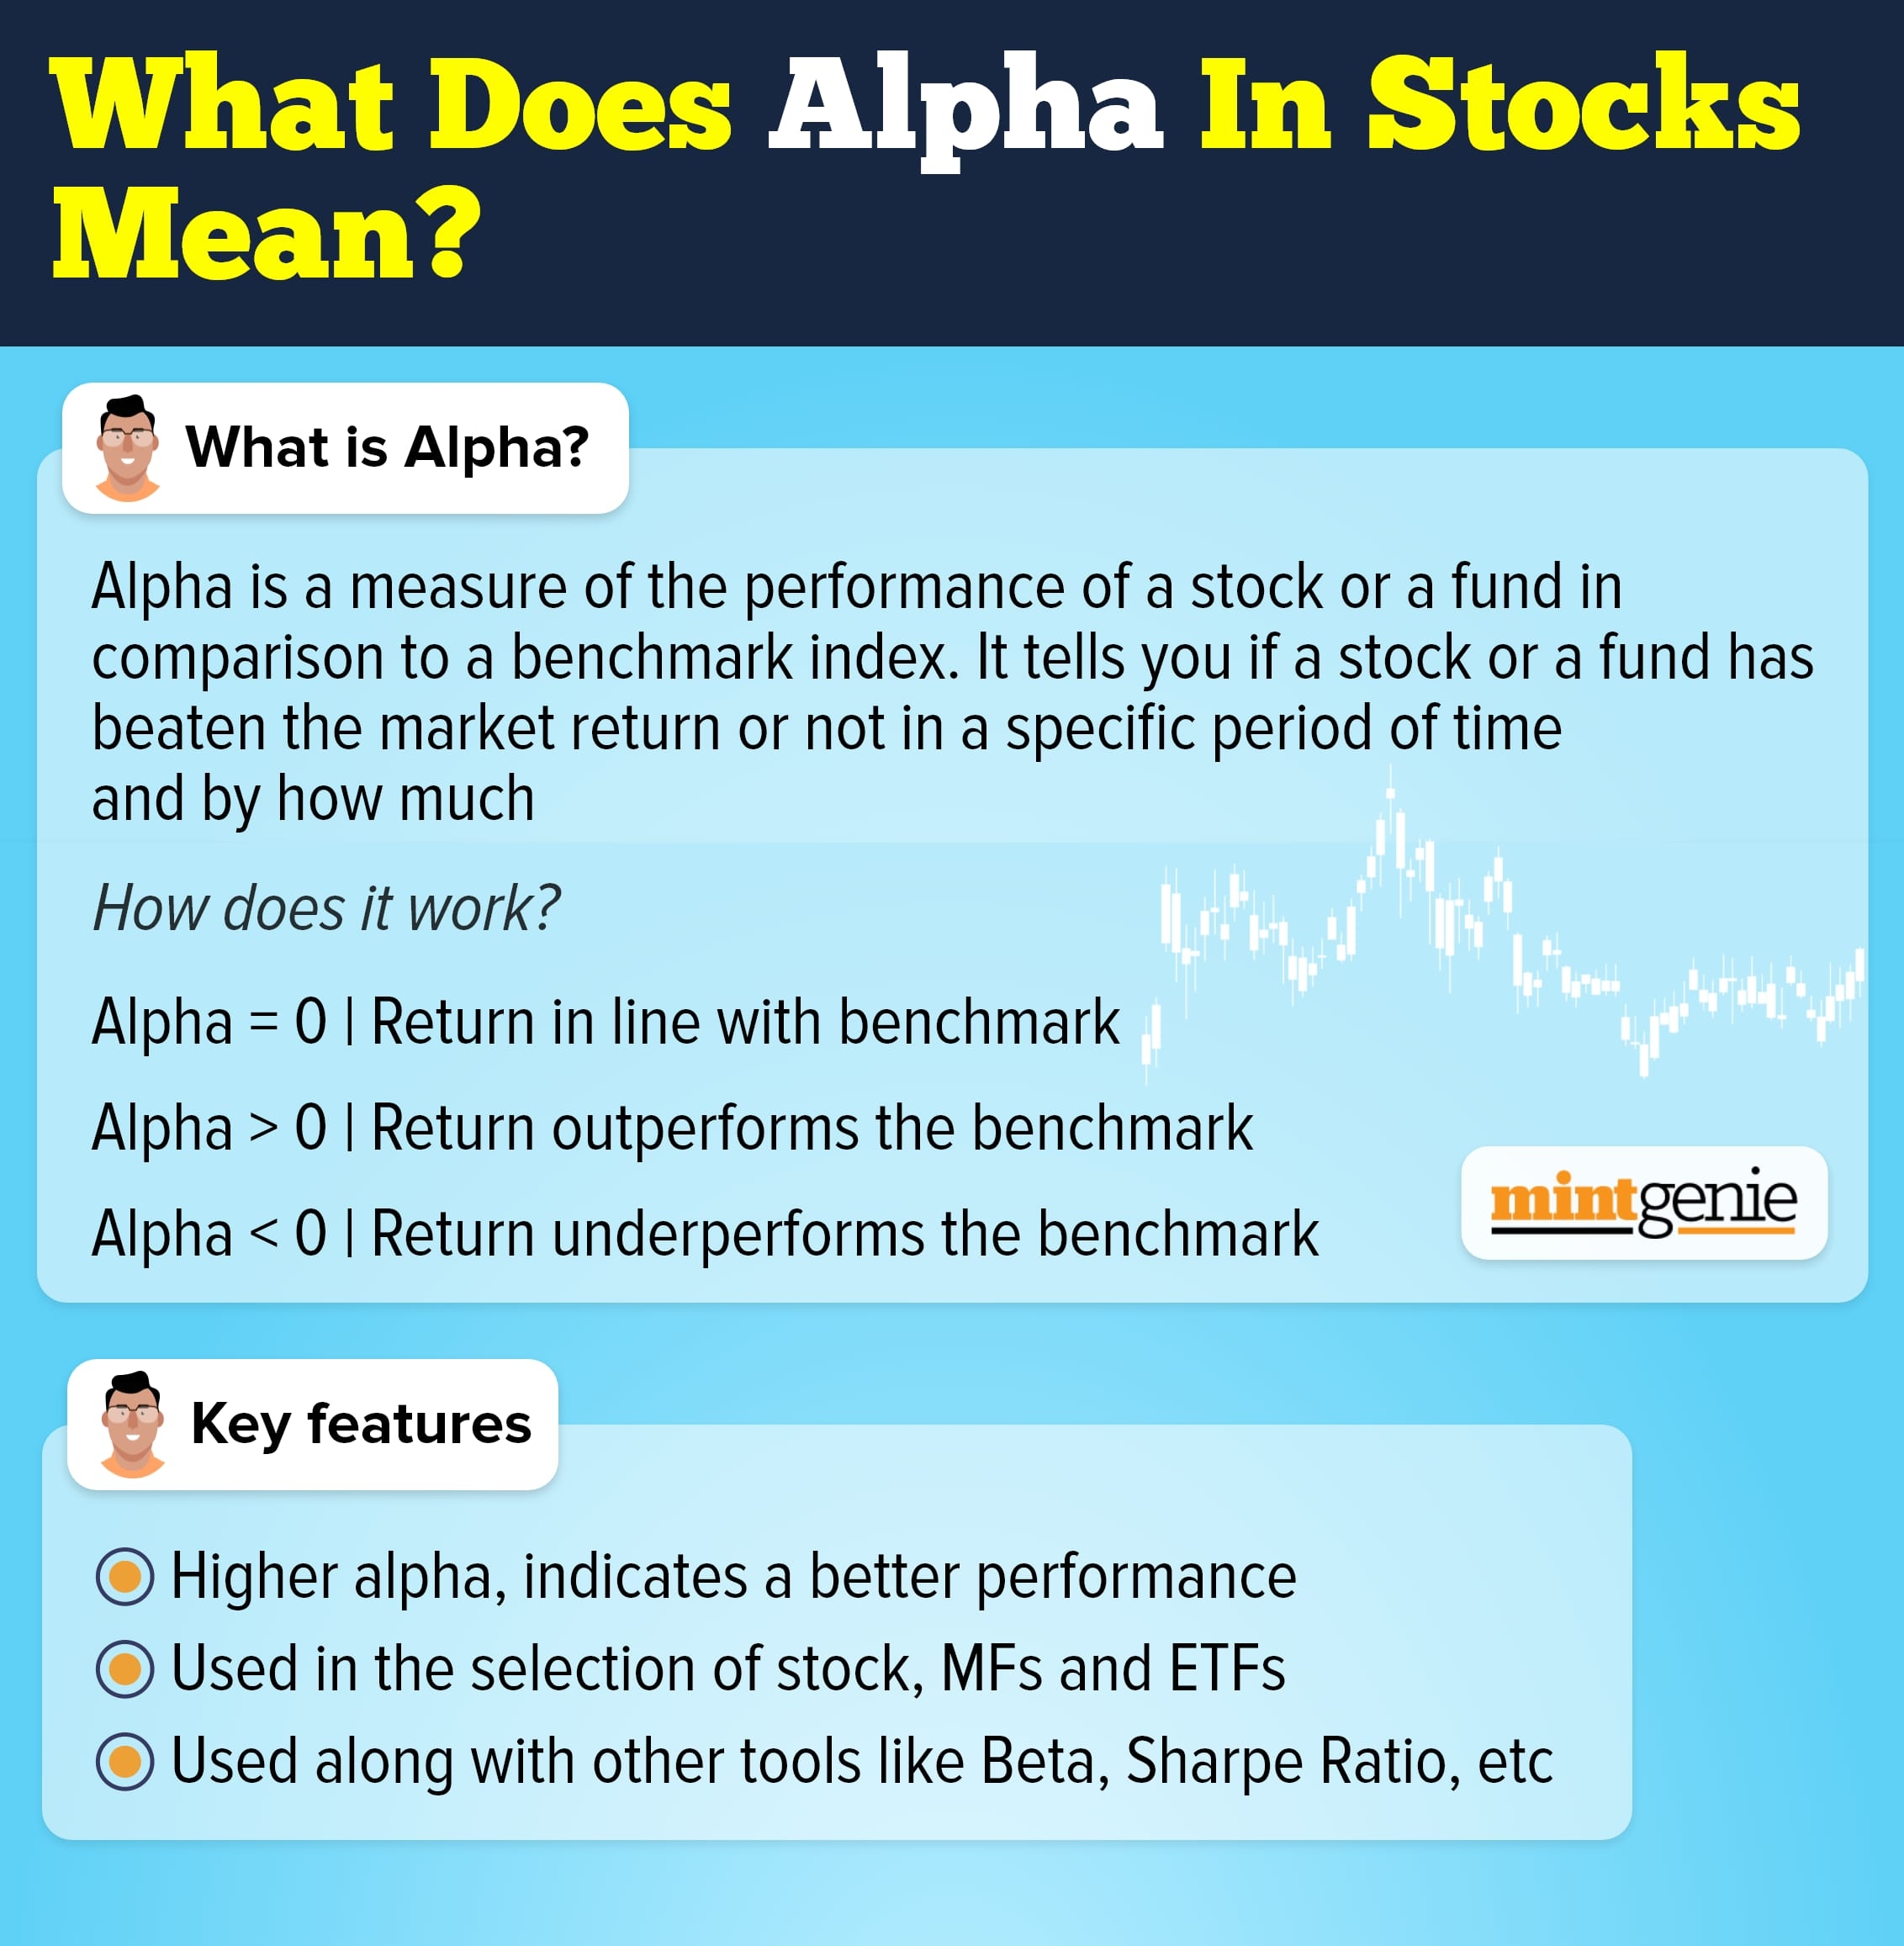 What is alpha in stocks